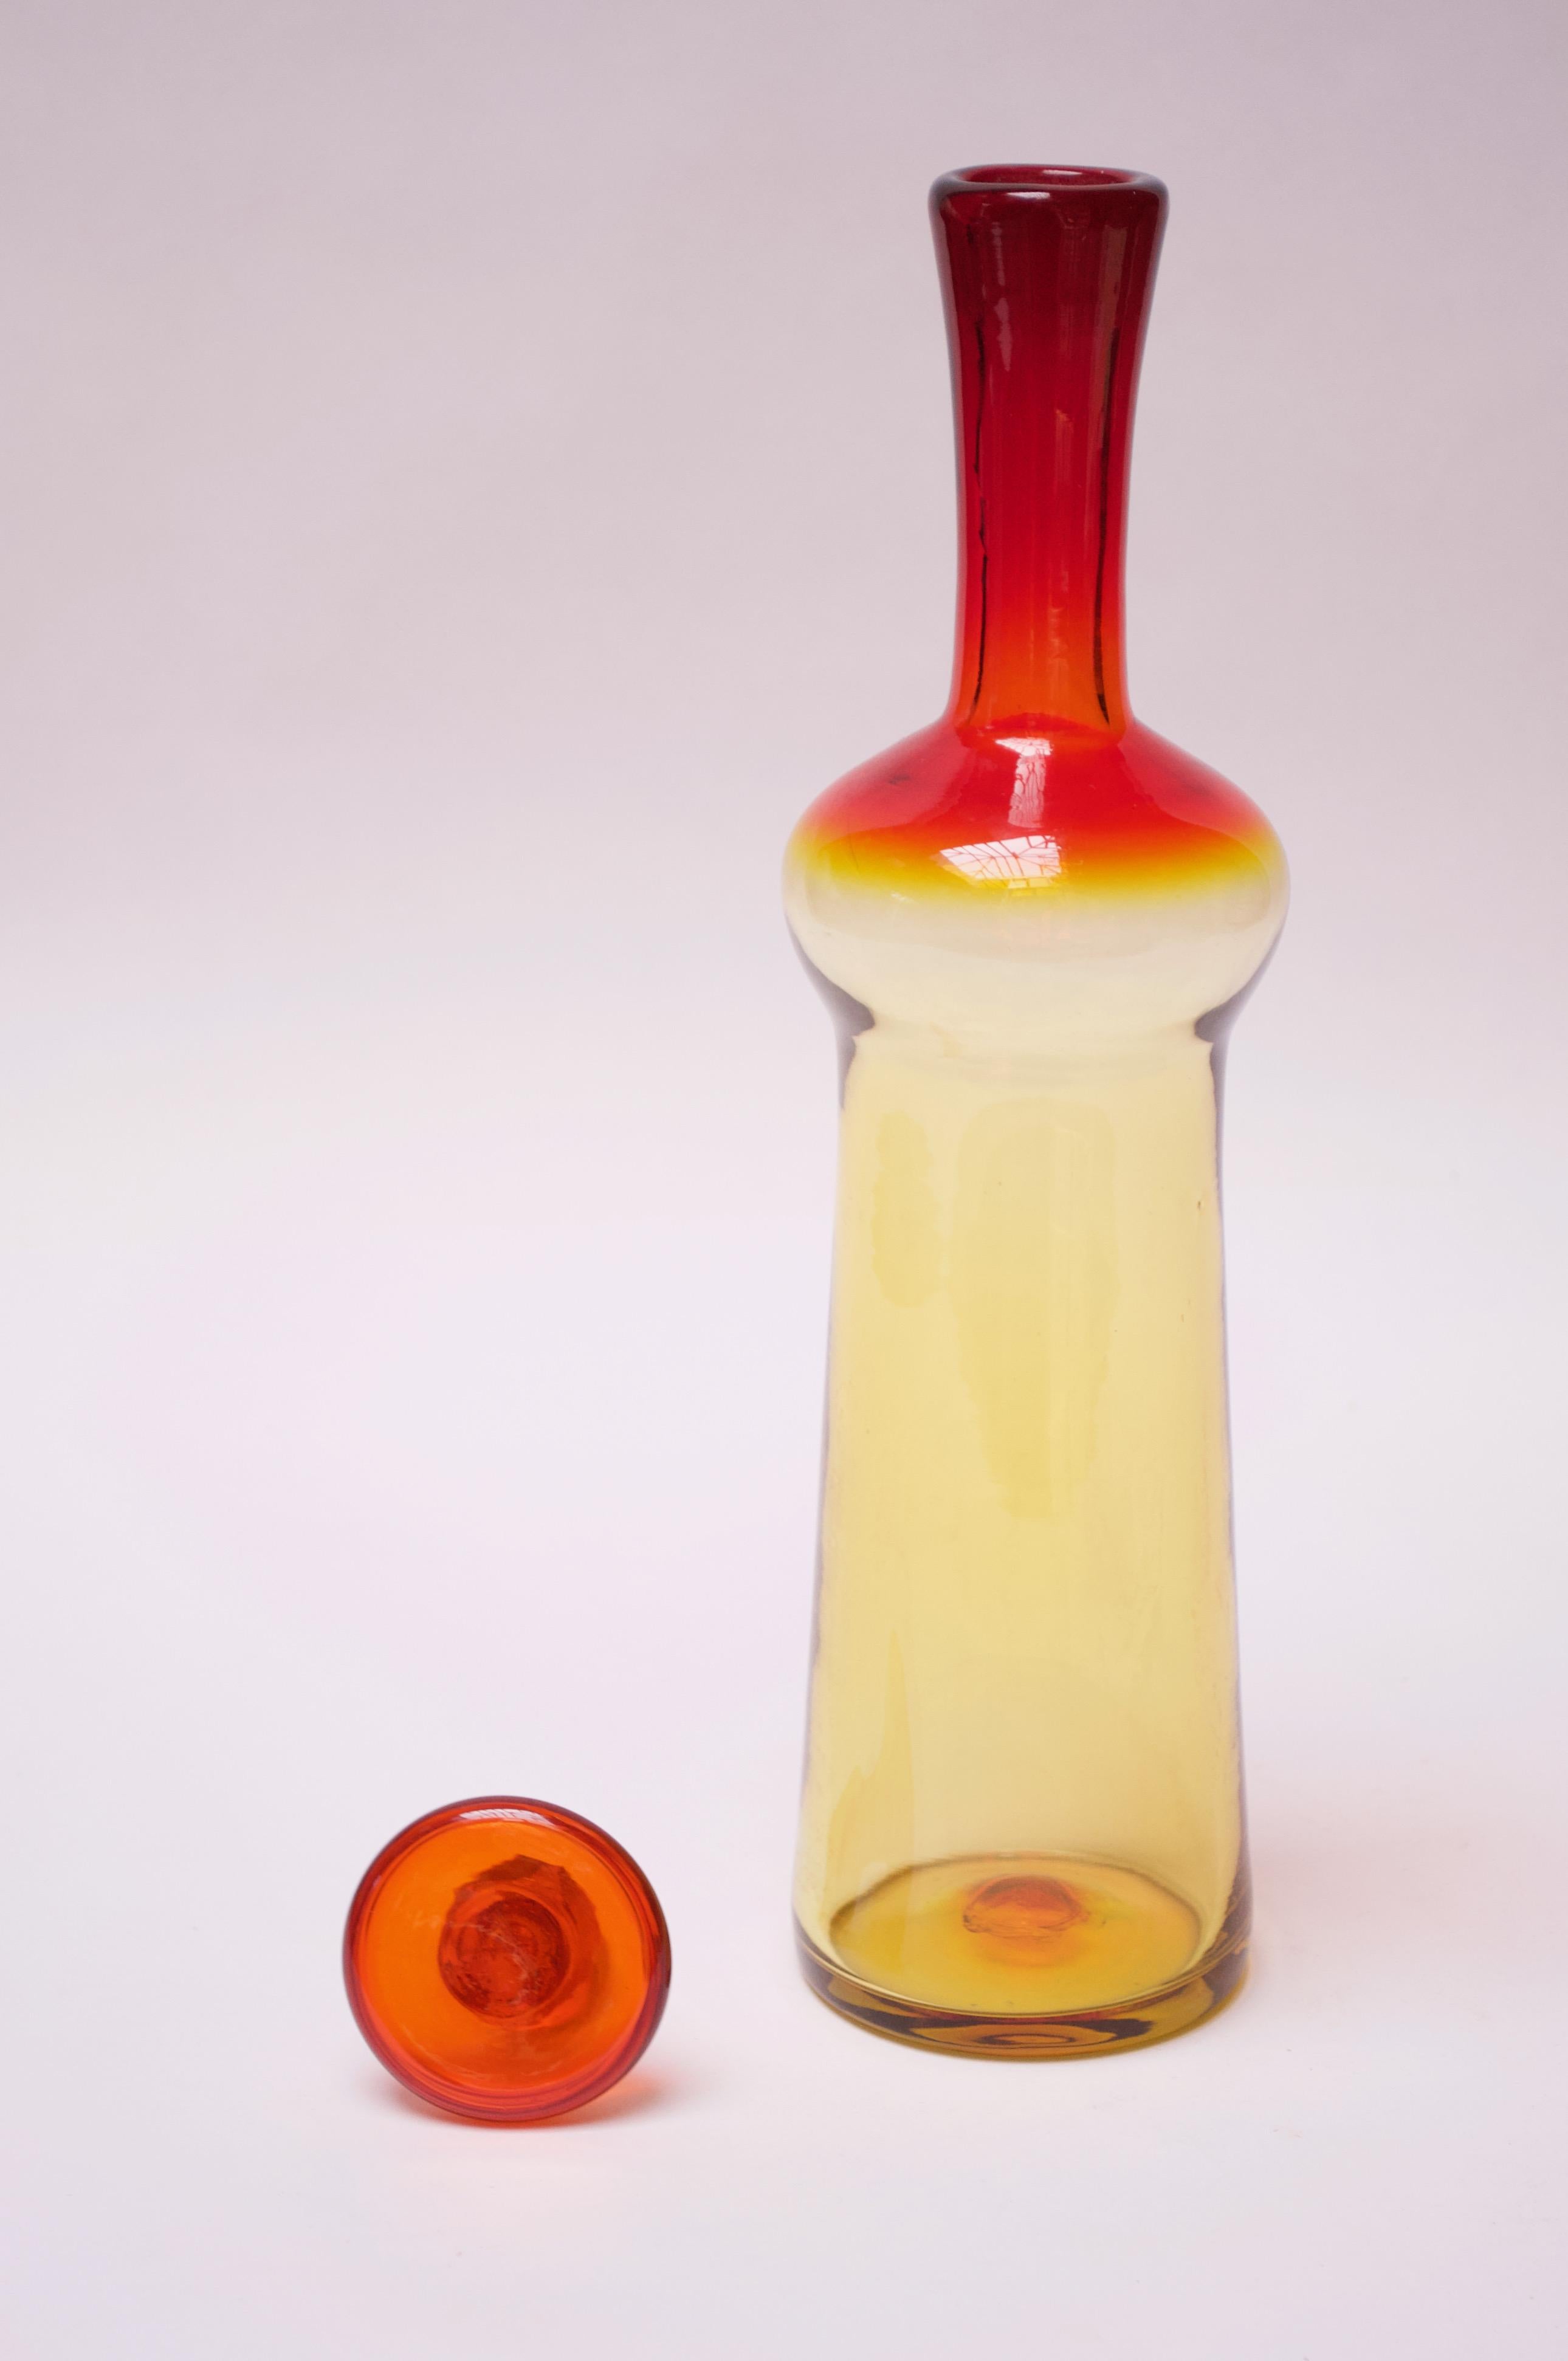 Blown glass decanter with original button stopper designed in the 1960s by Wayne Husted for Blenko as part of the 